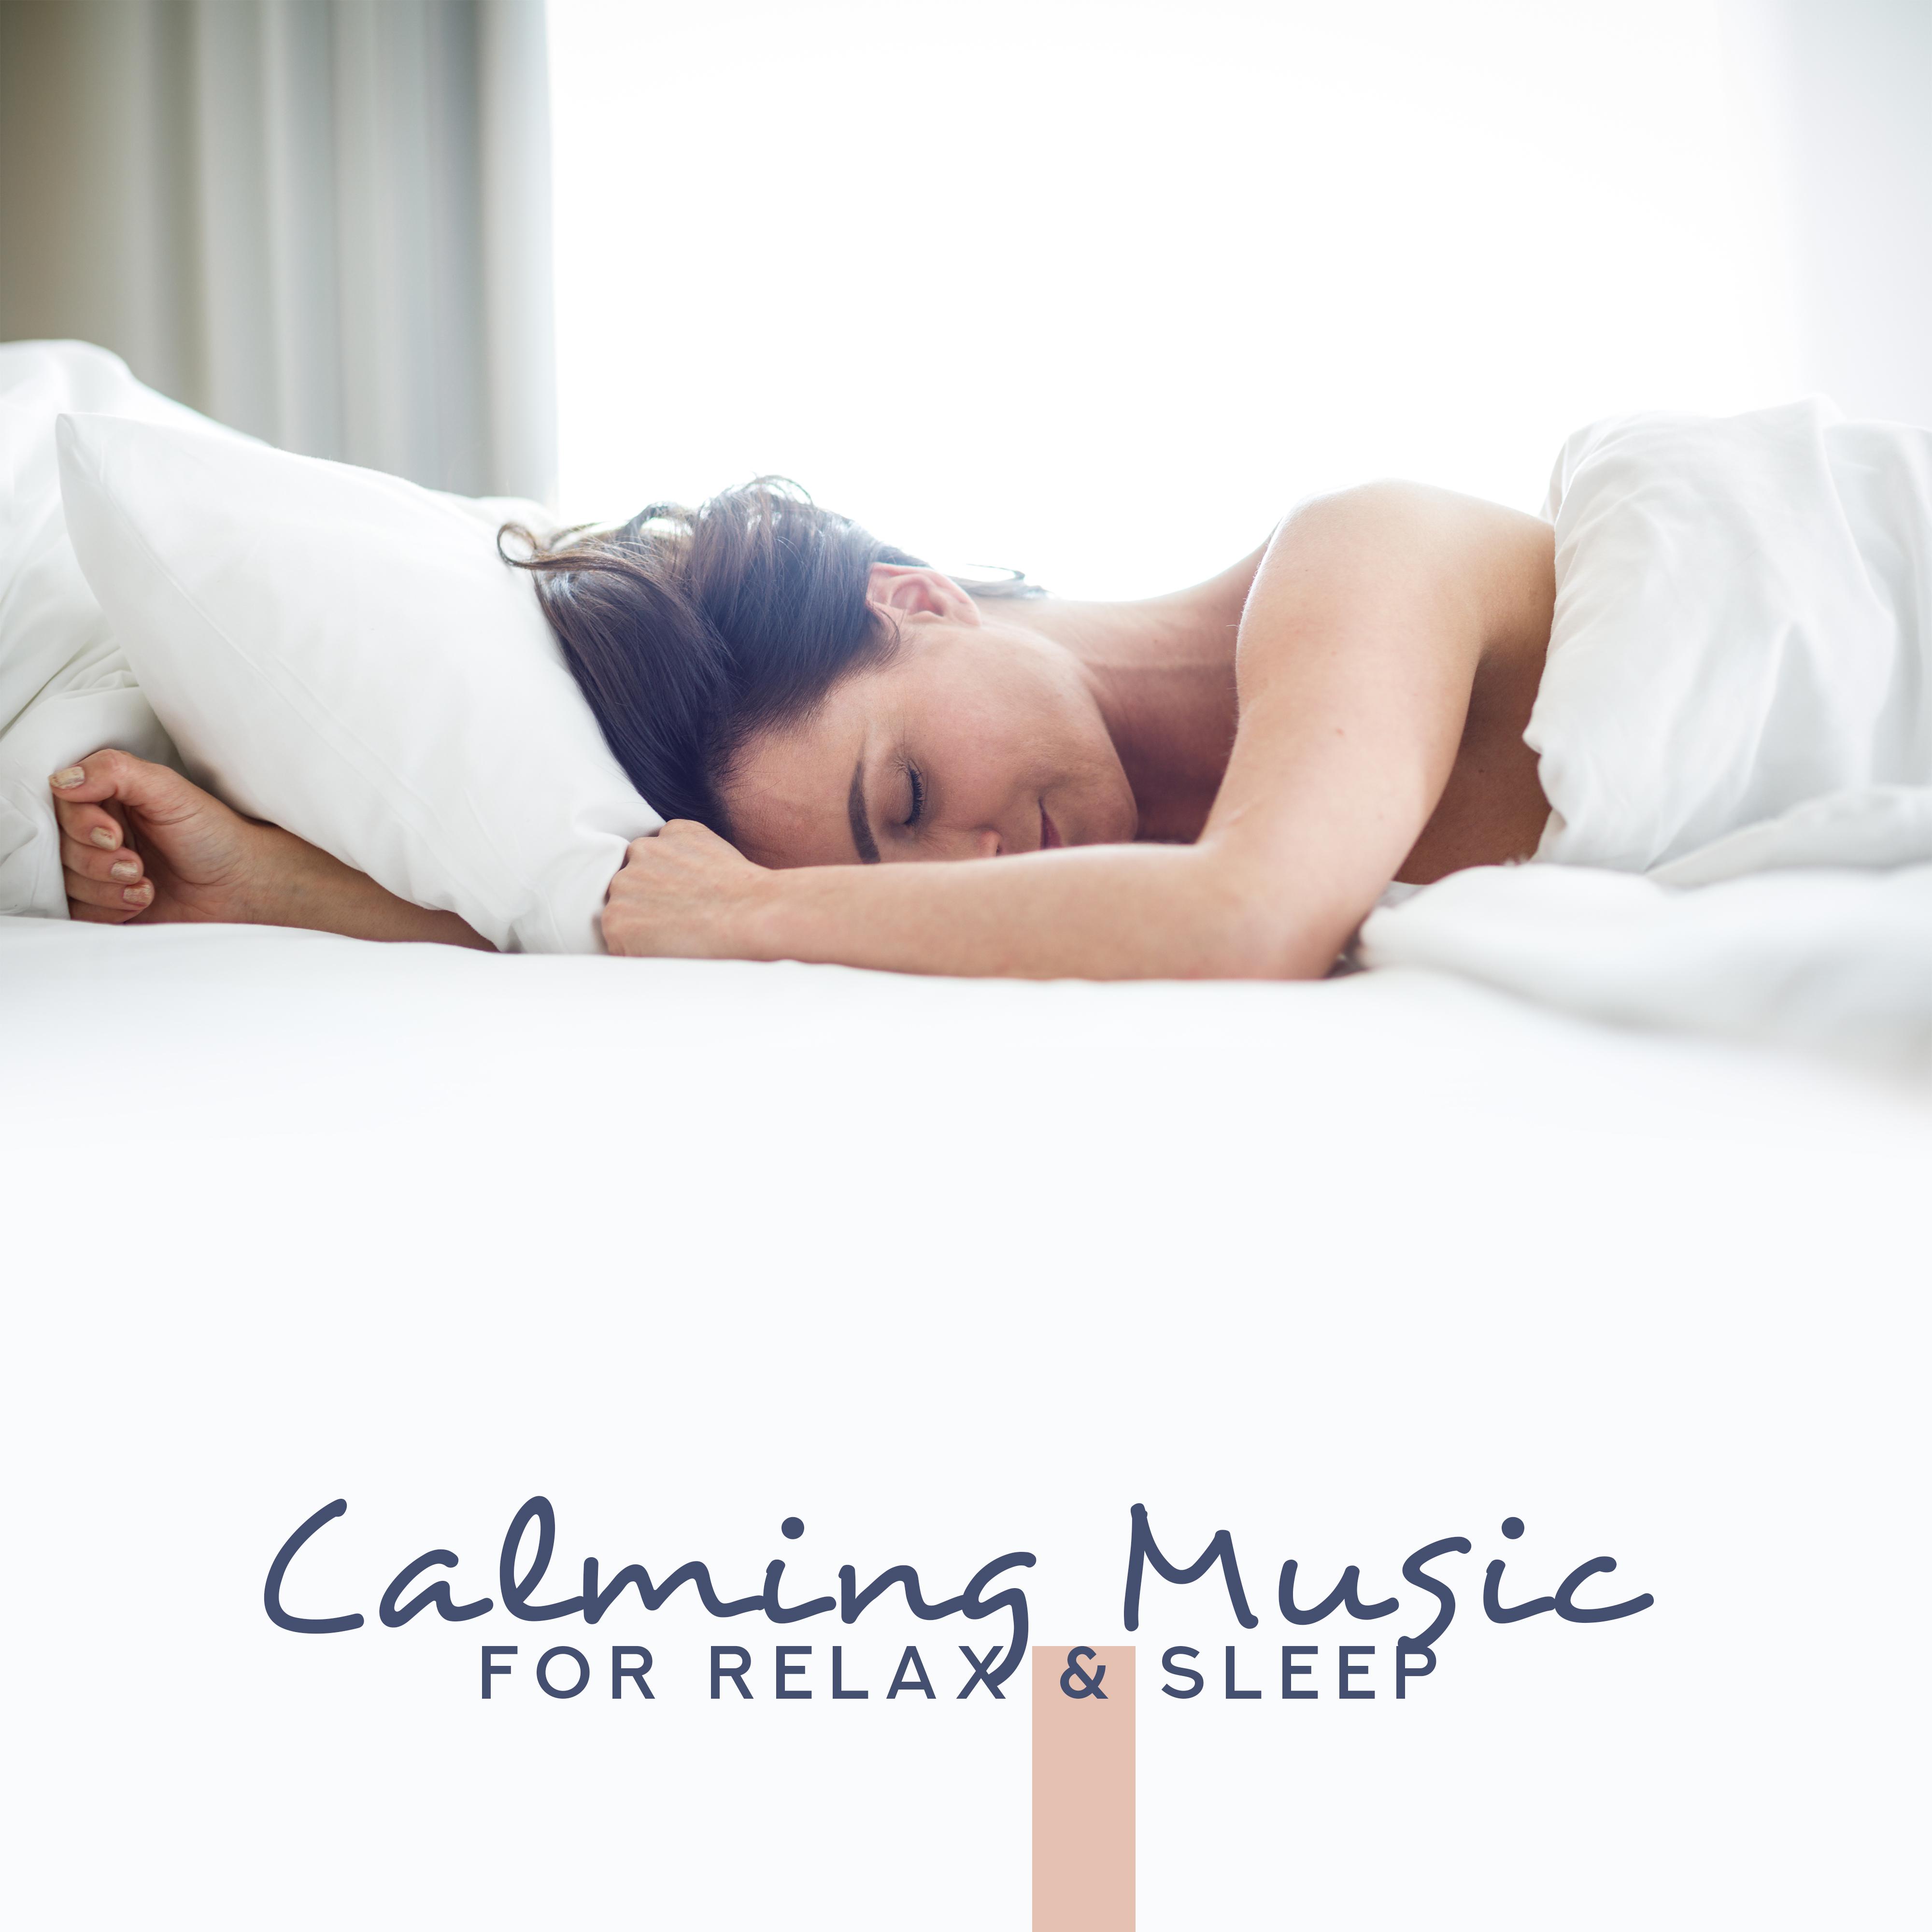 Calming Music for Relax & Sleep – Peaceful Chill Out, Total Relax, Stress Relief, Relaxing Sleep, Best Chill Out 2019